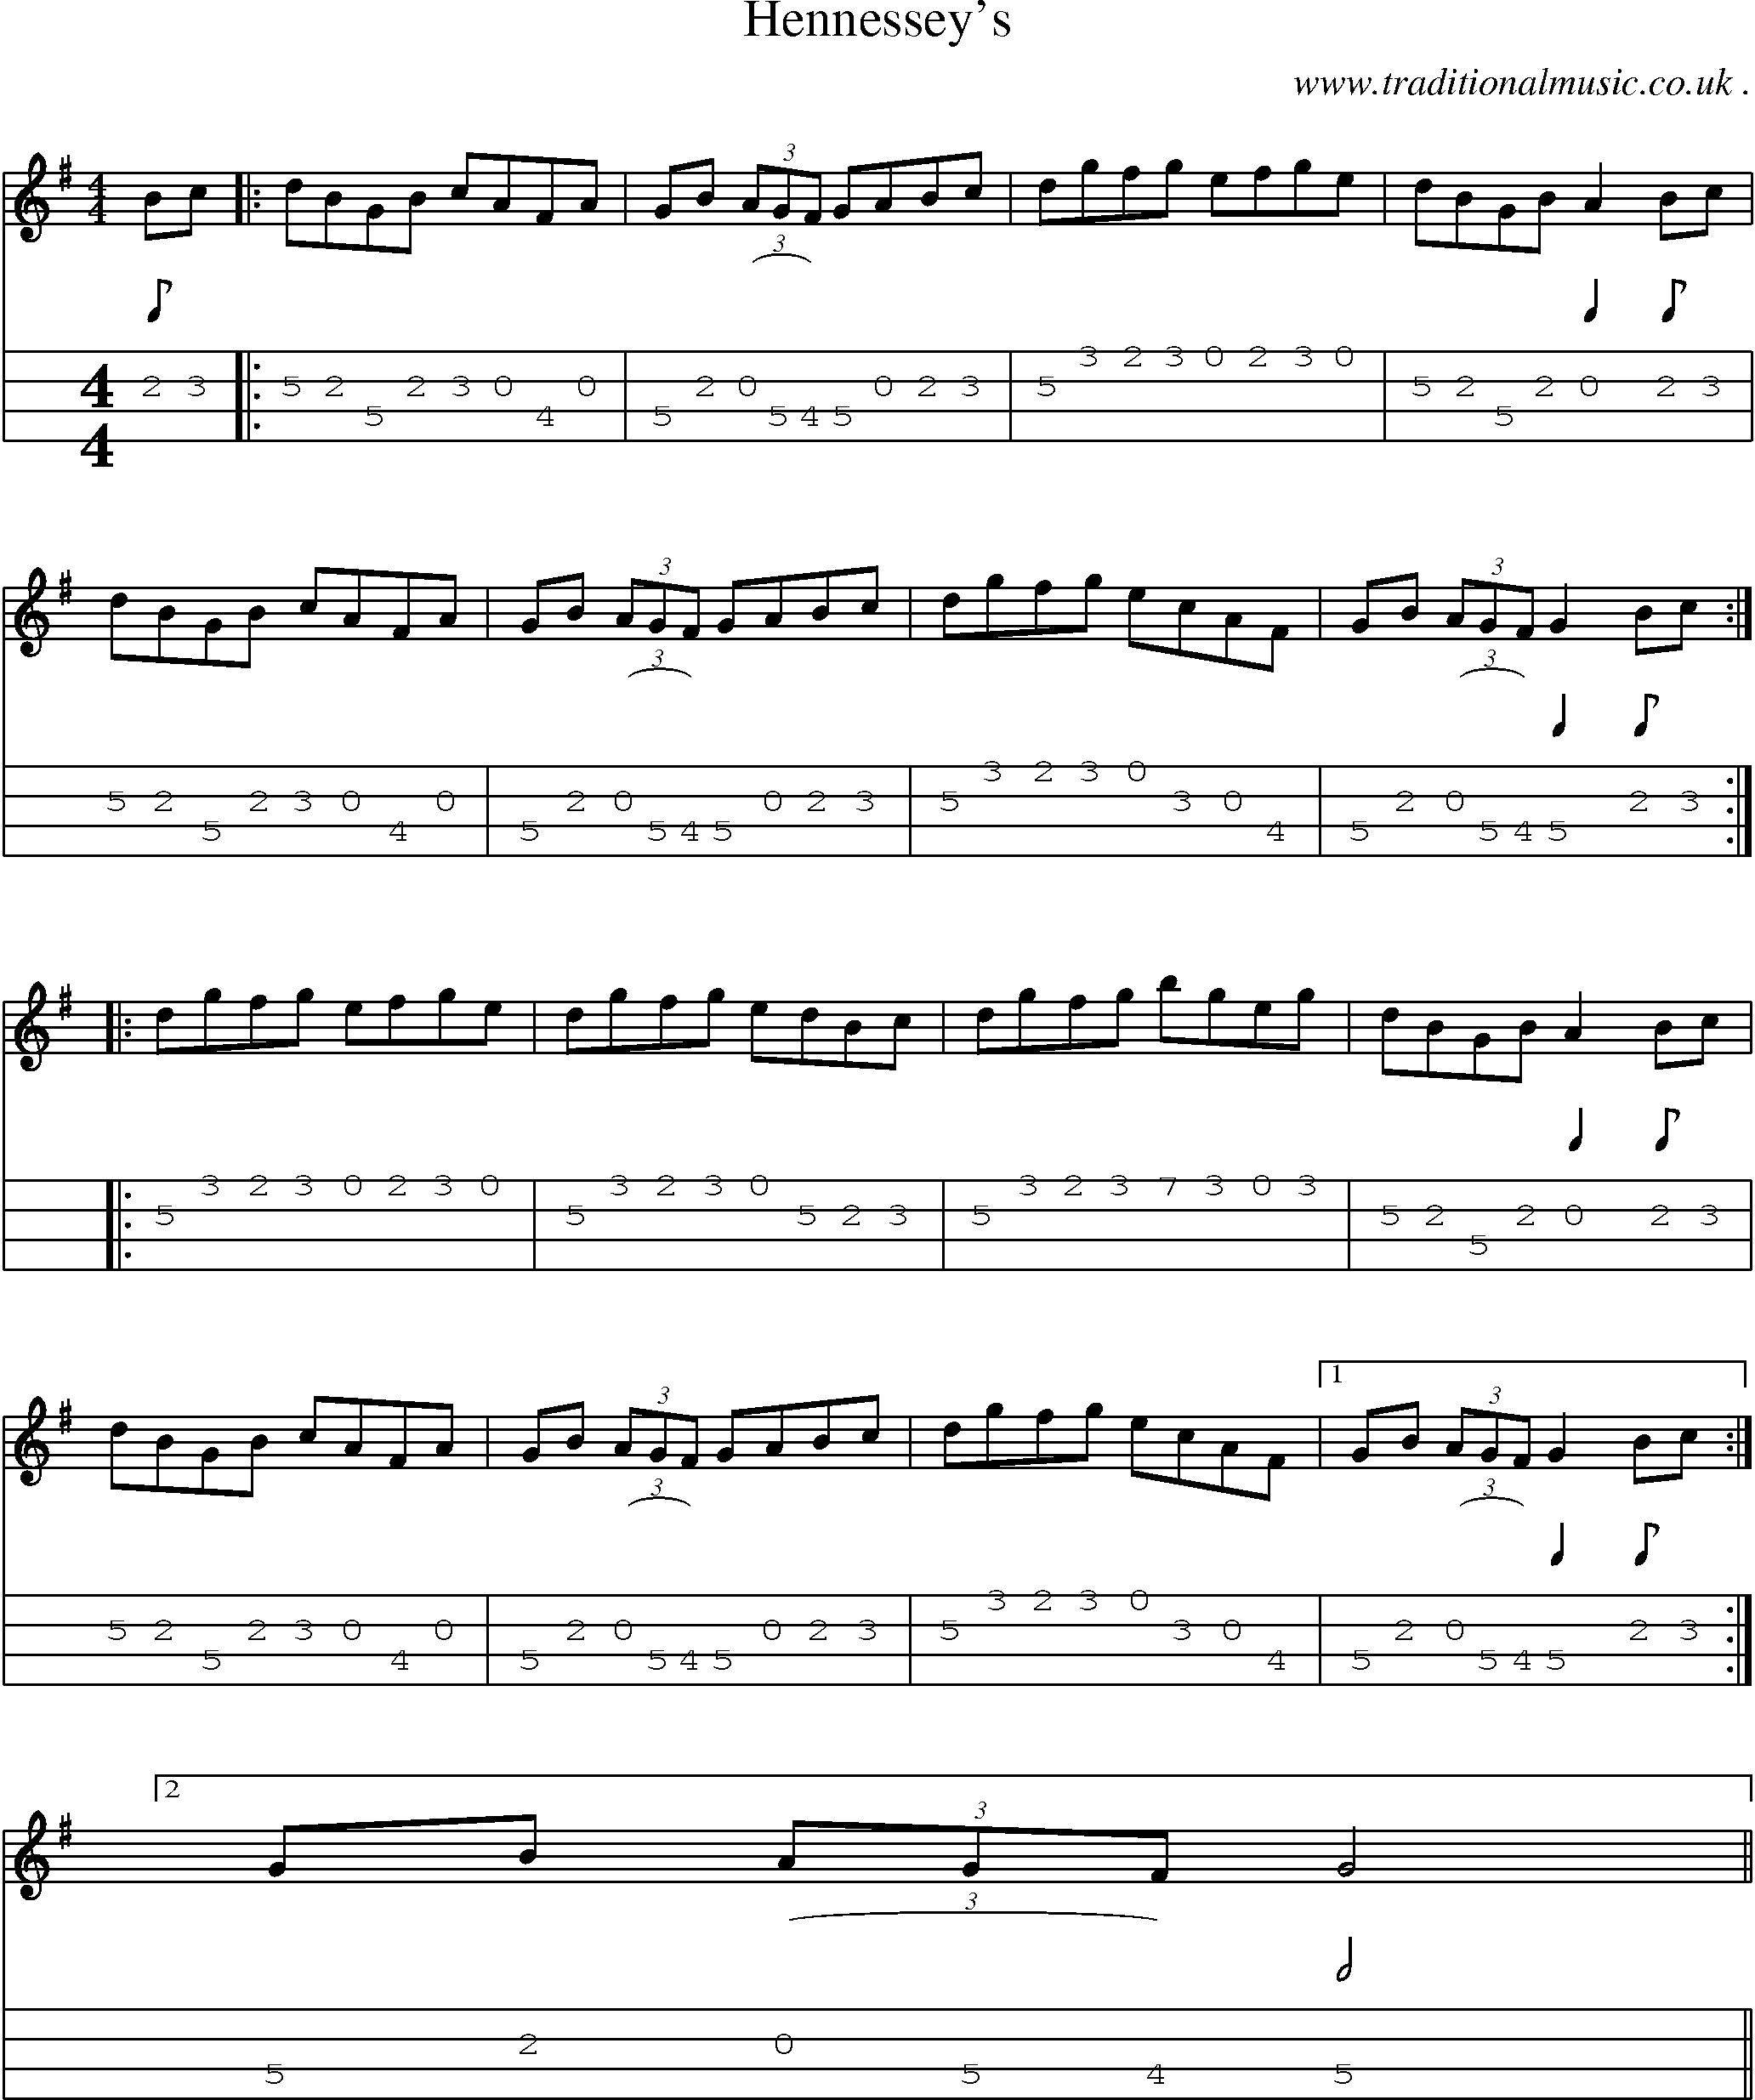 Sheet-Music and Mandolin Tabs for Hennesseys